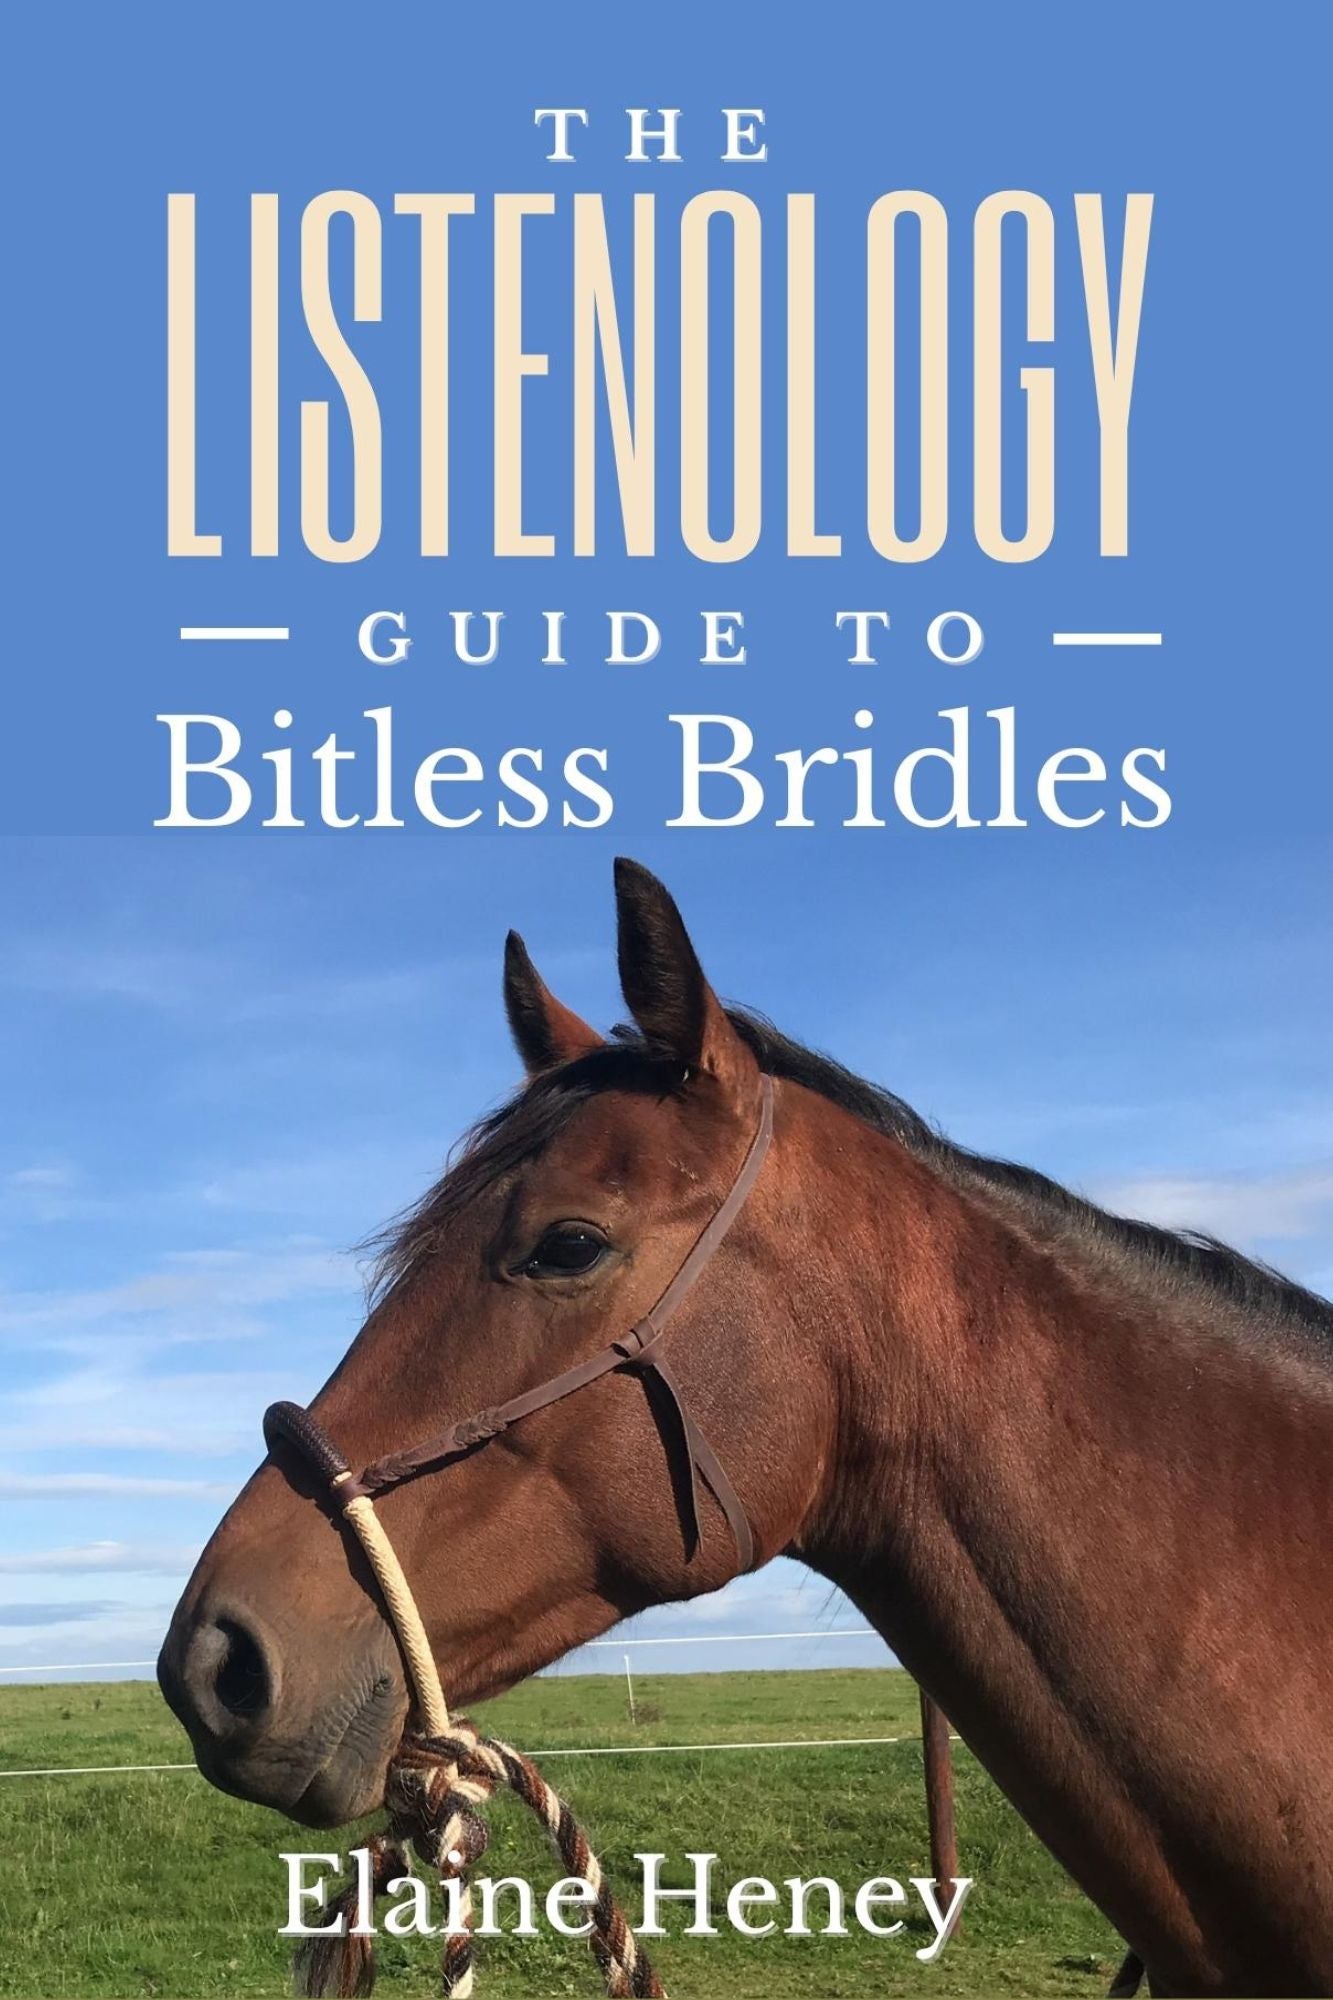 The Listenology Guide to Bitless Bridles for Horses - How to choose your first Bitless Bridle for your horse or pony